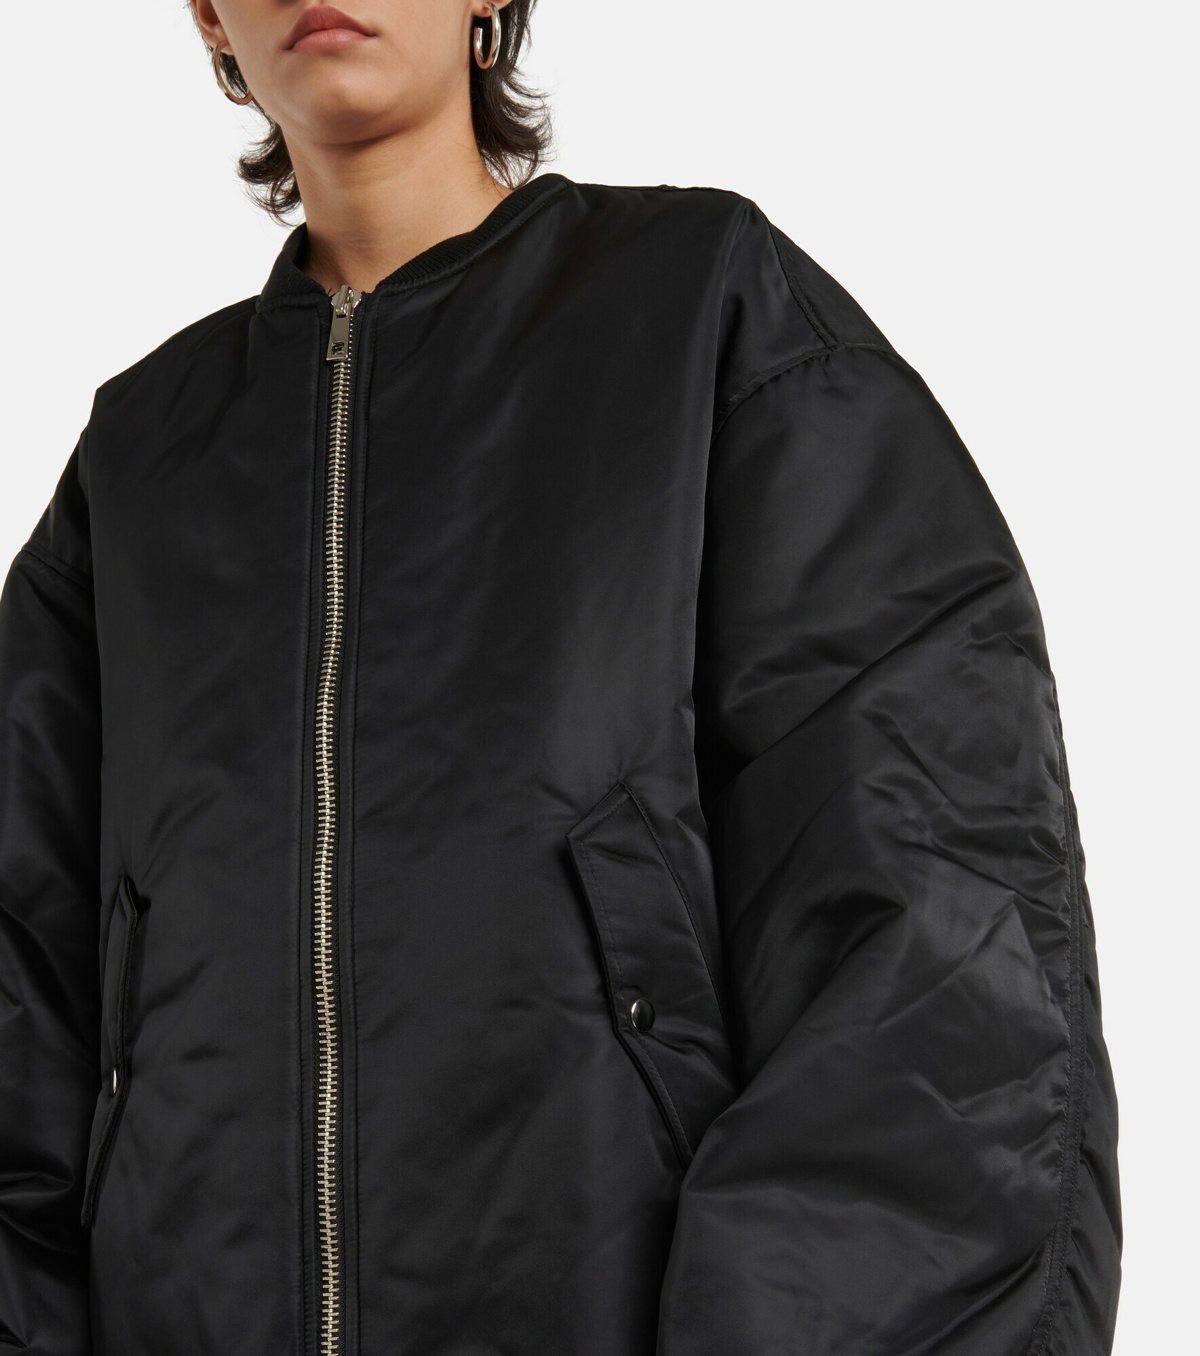 The Frankie Shop - Astra technical bomber jacket The Frankie Shop